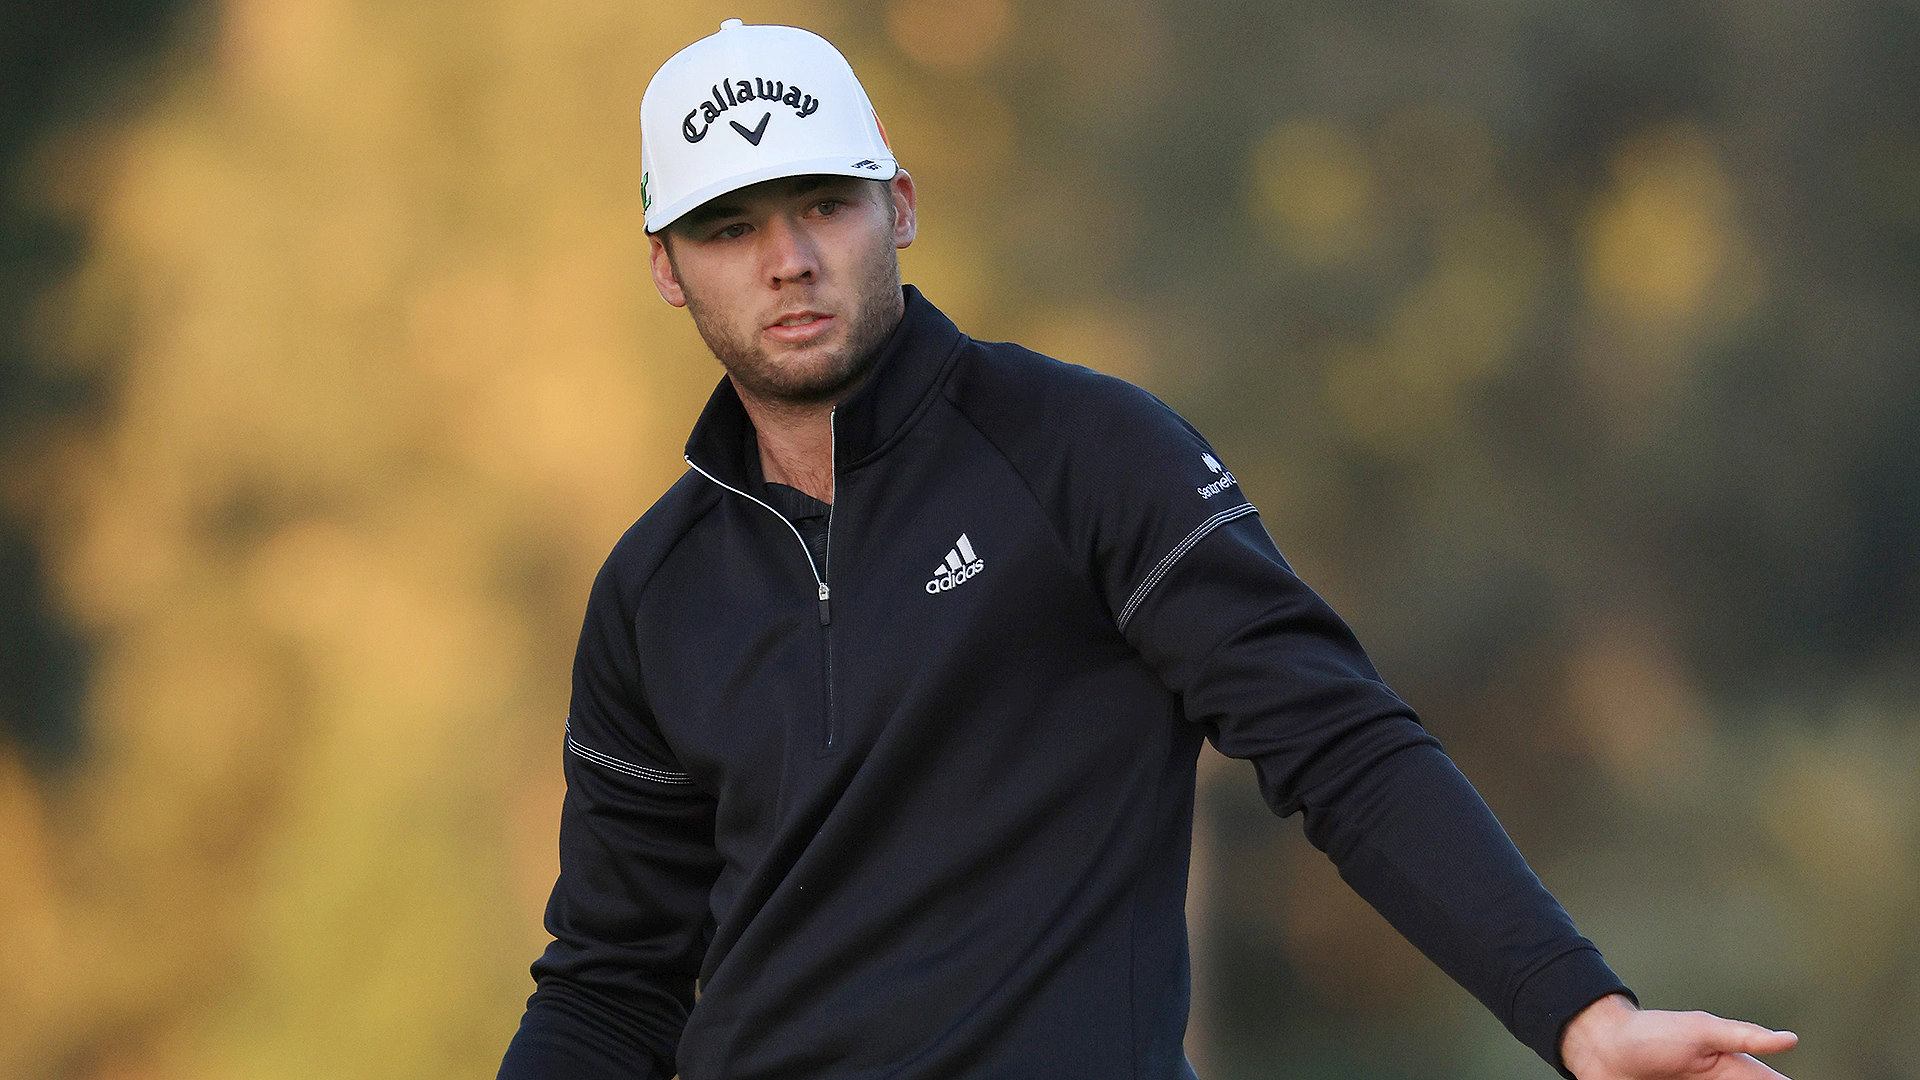 Sam Burns hangs on for lead over Dustin Johnson and Co. entering final round of Genesis